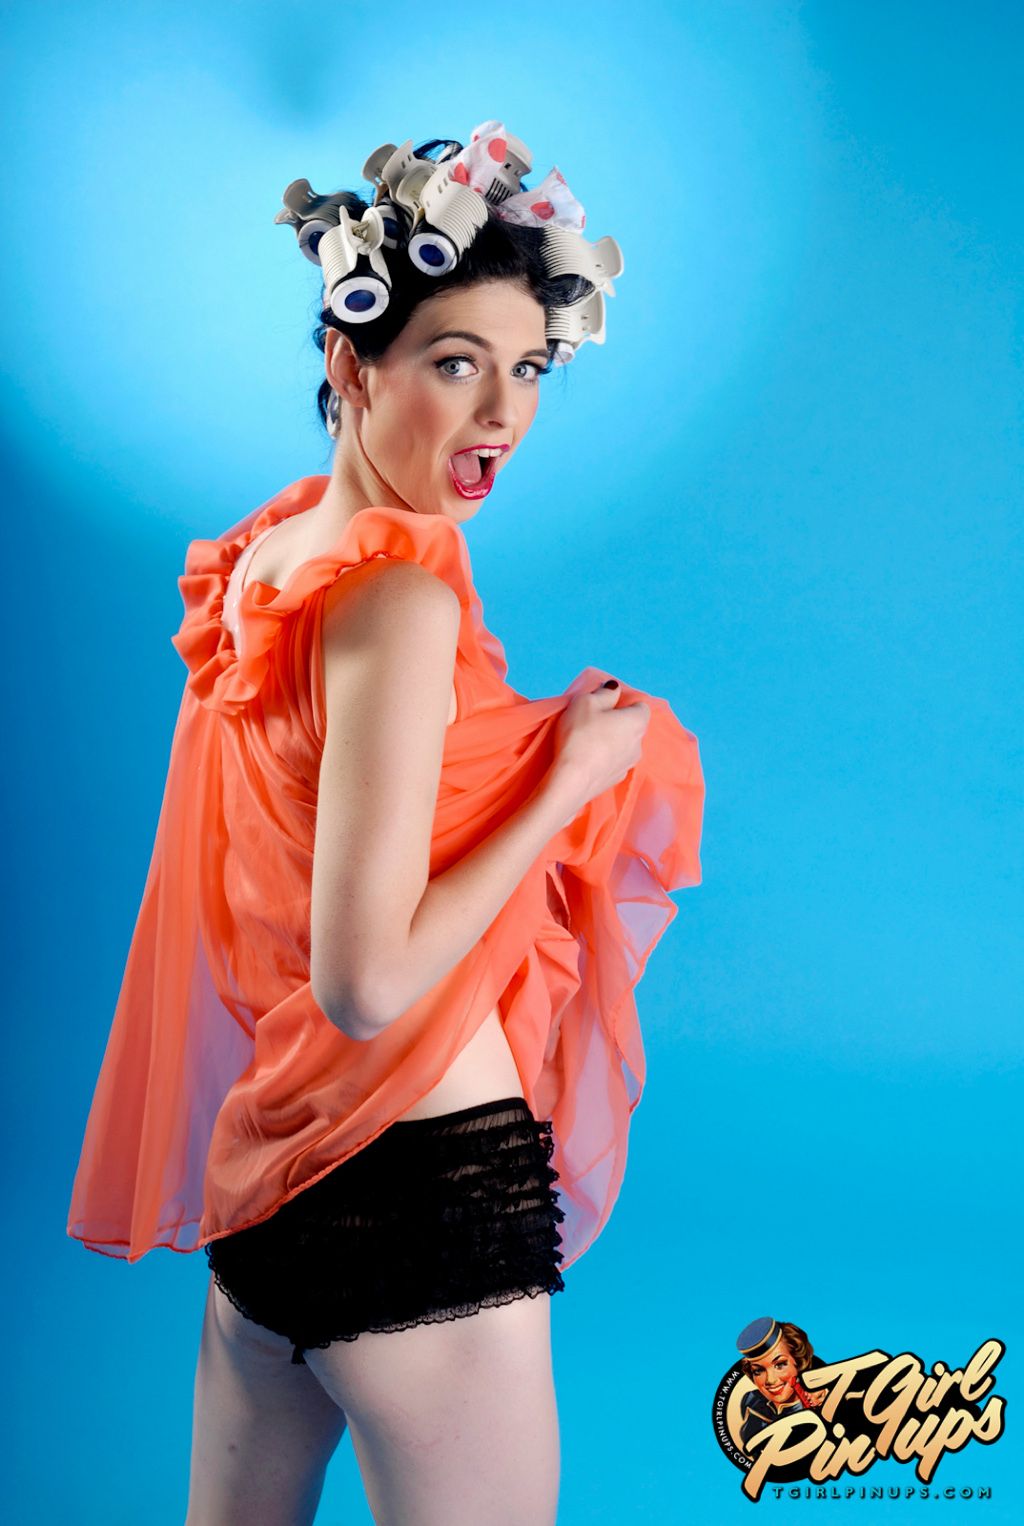 Thin transsexual Mandy Mitchell gets naked with her hair in curlers for a retro shoot TRANS.pics